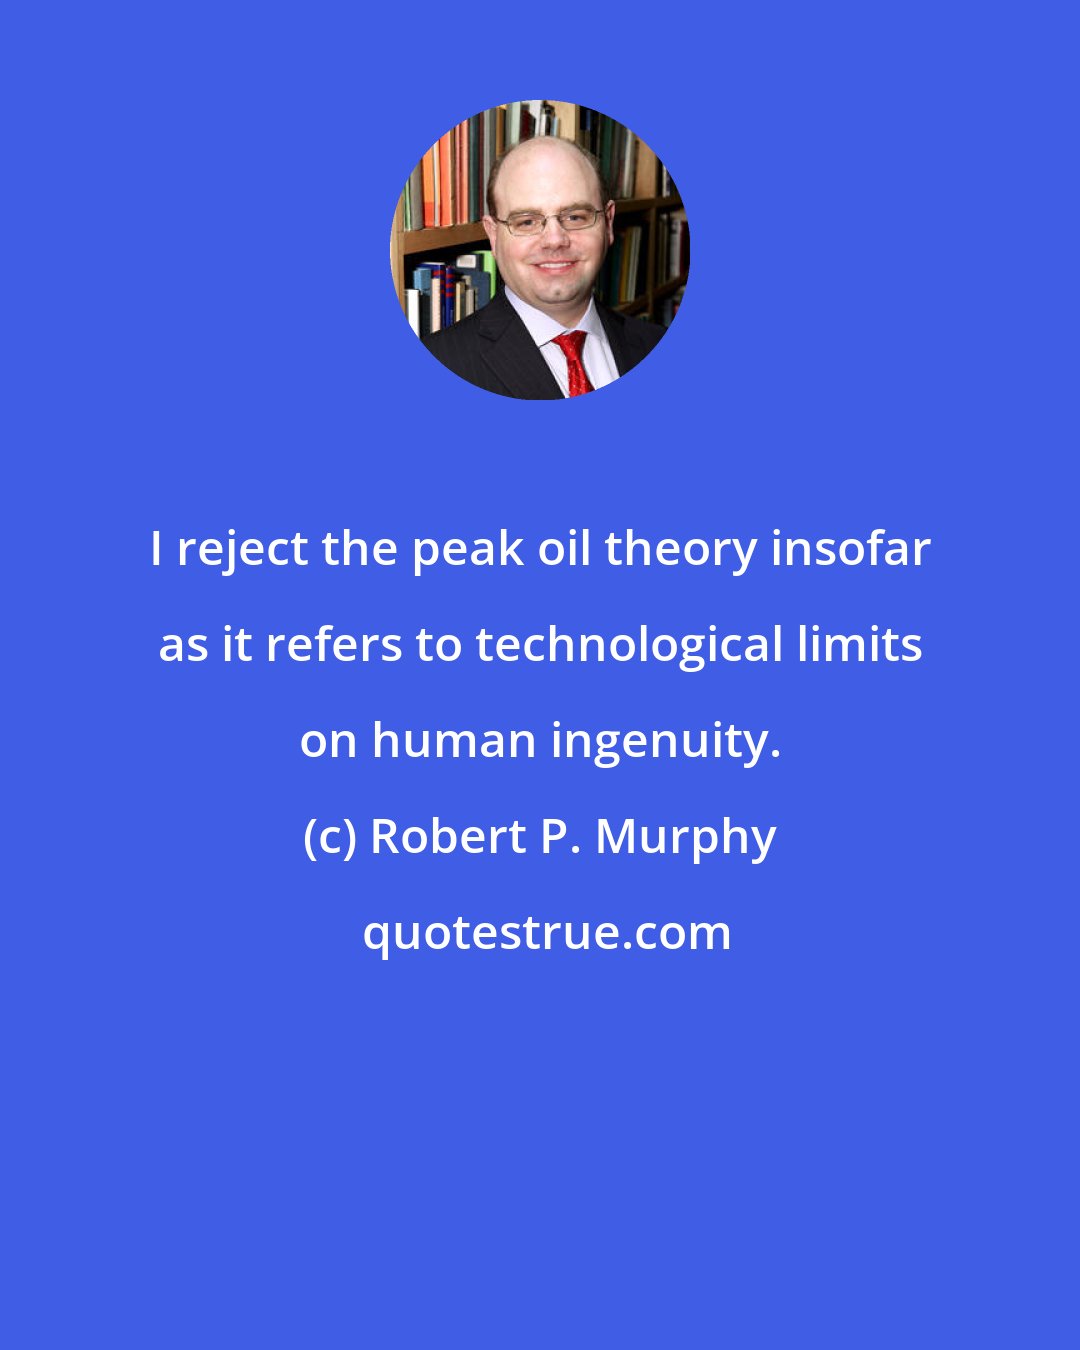 Robert P. Murphy: I reject the peak oil theory insofar as it refers to technological limits on human ingenuity.